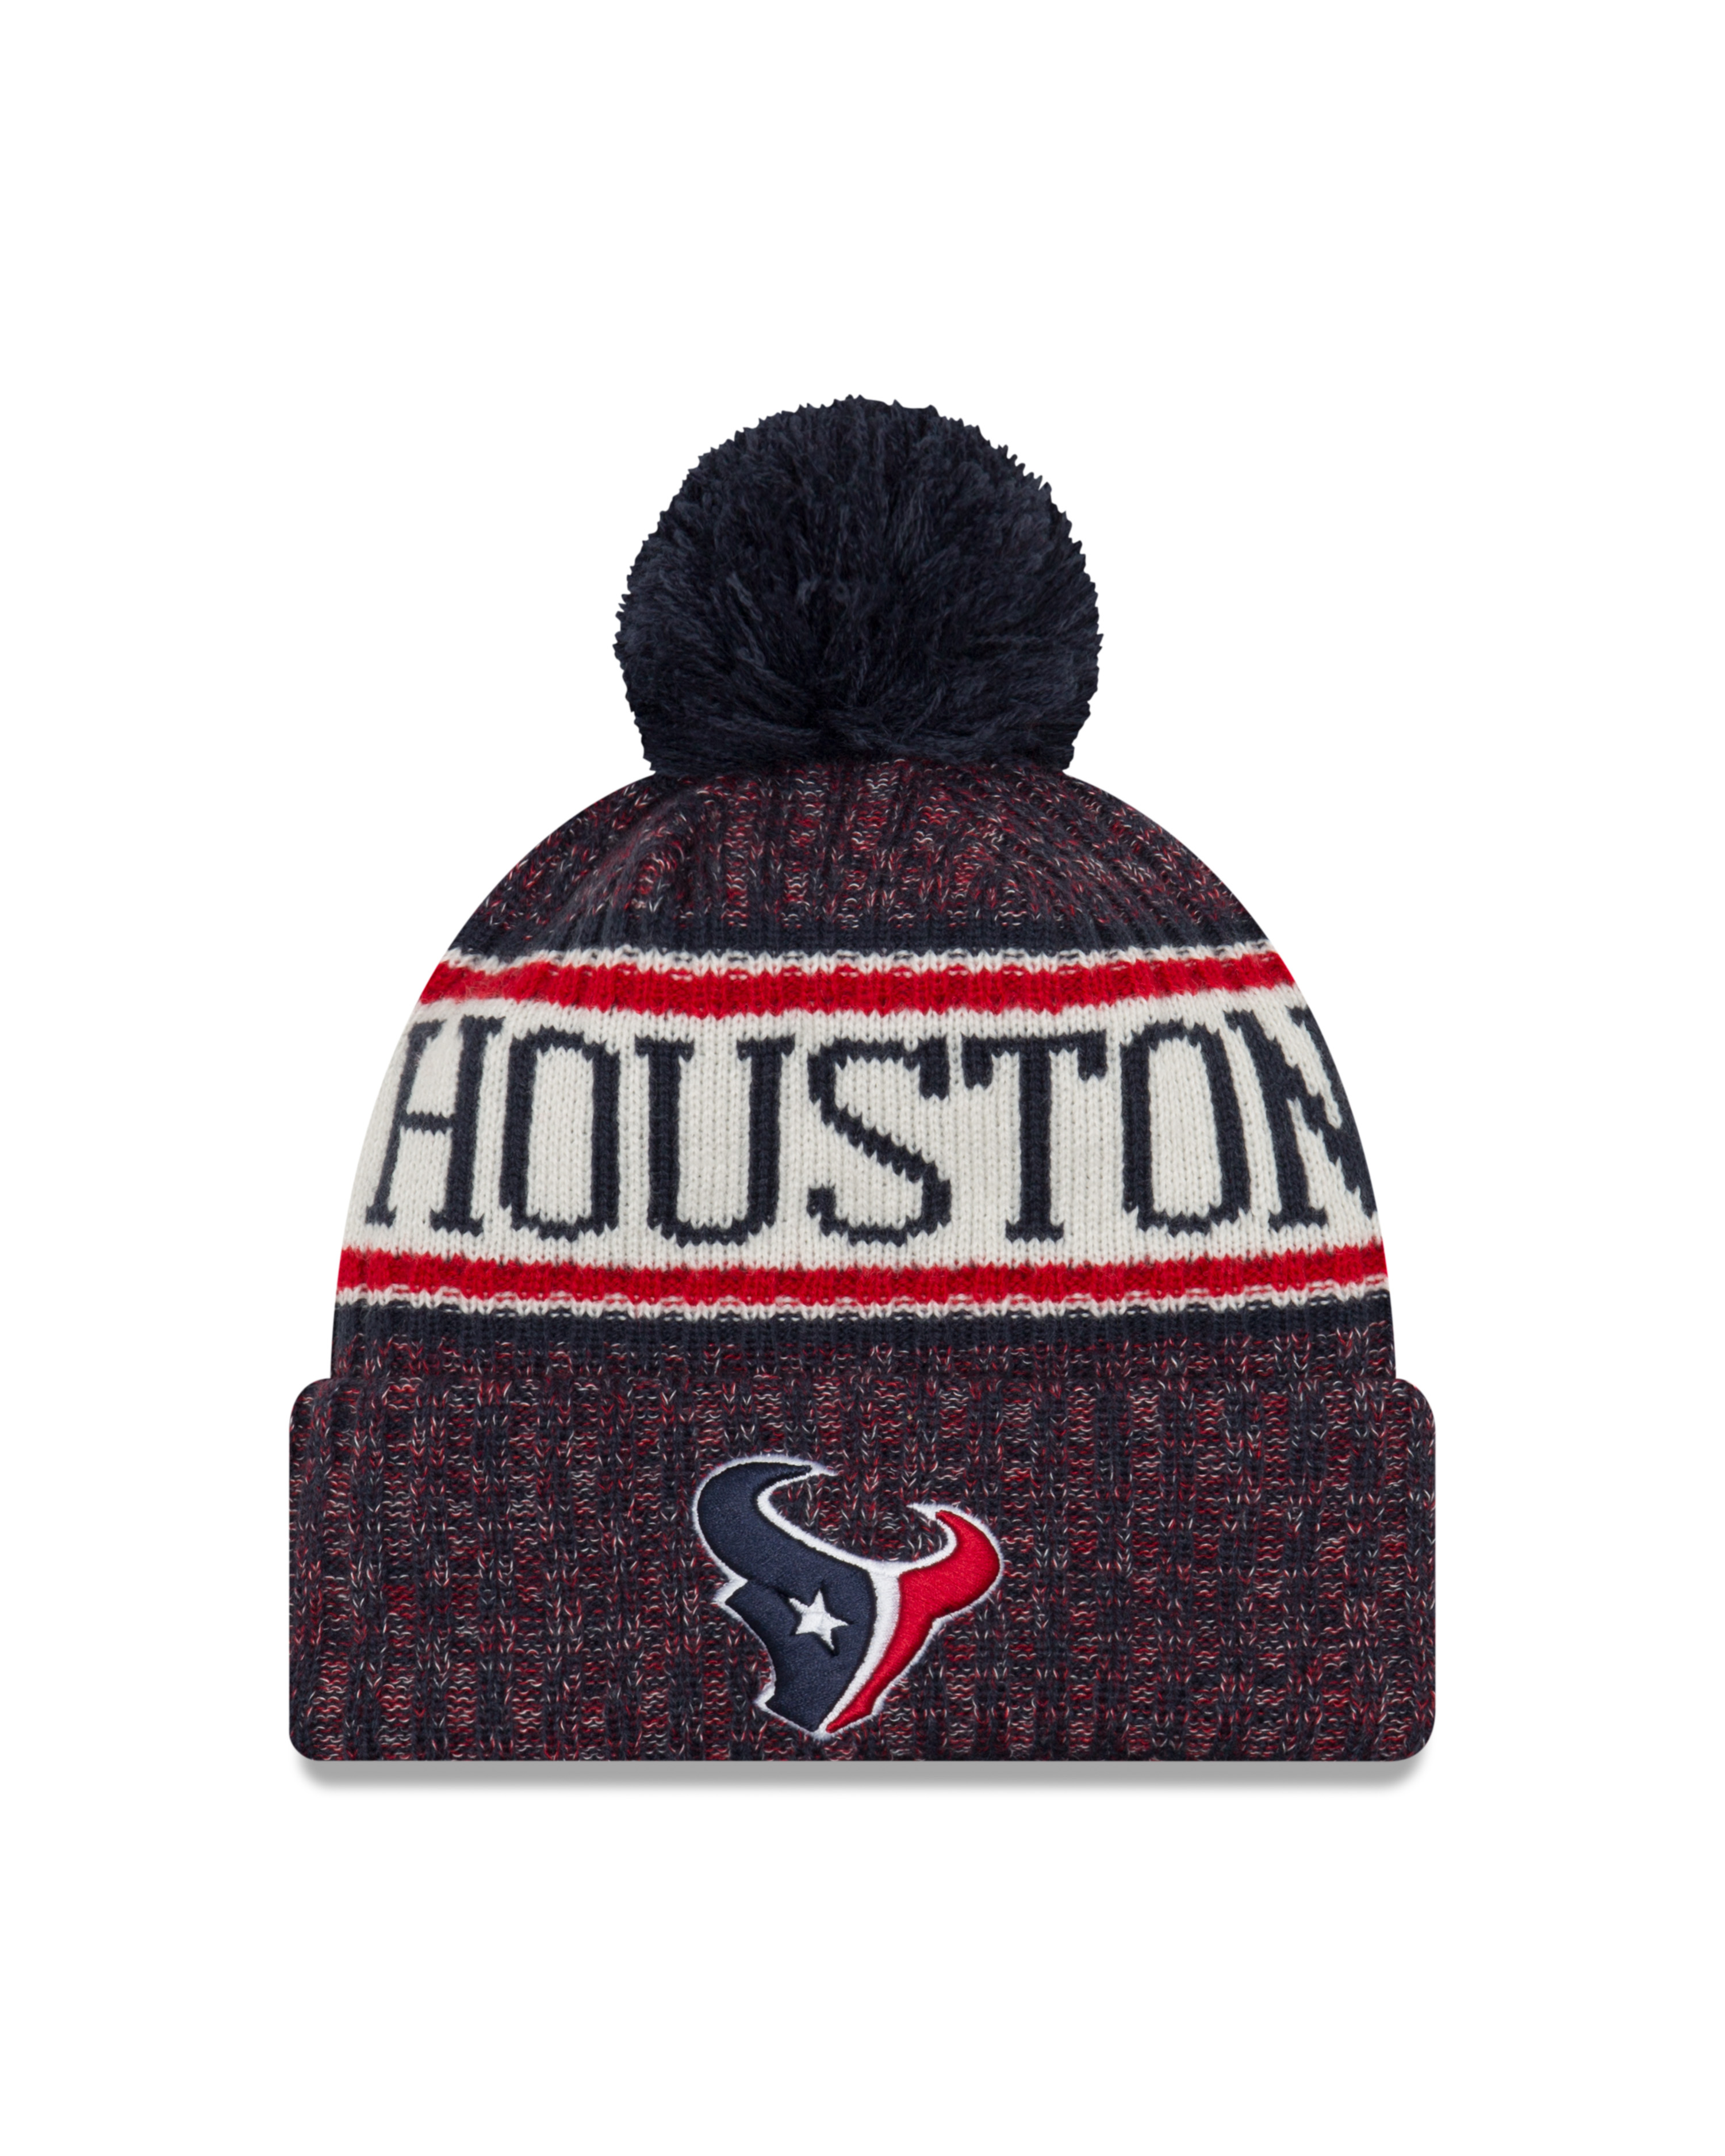 New Era Official NFL Cold Weather Collection #51